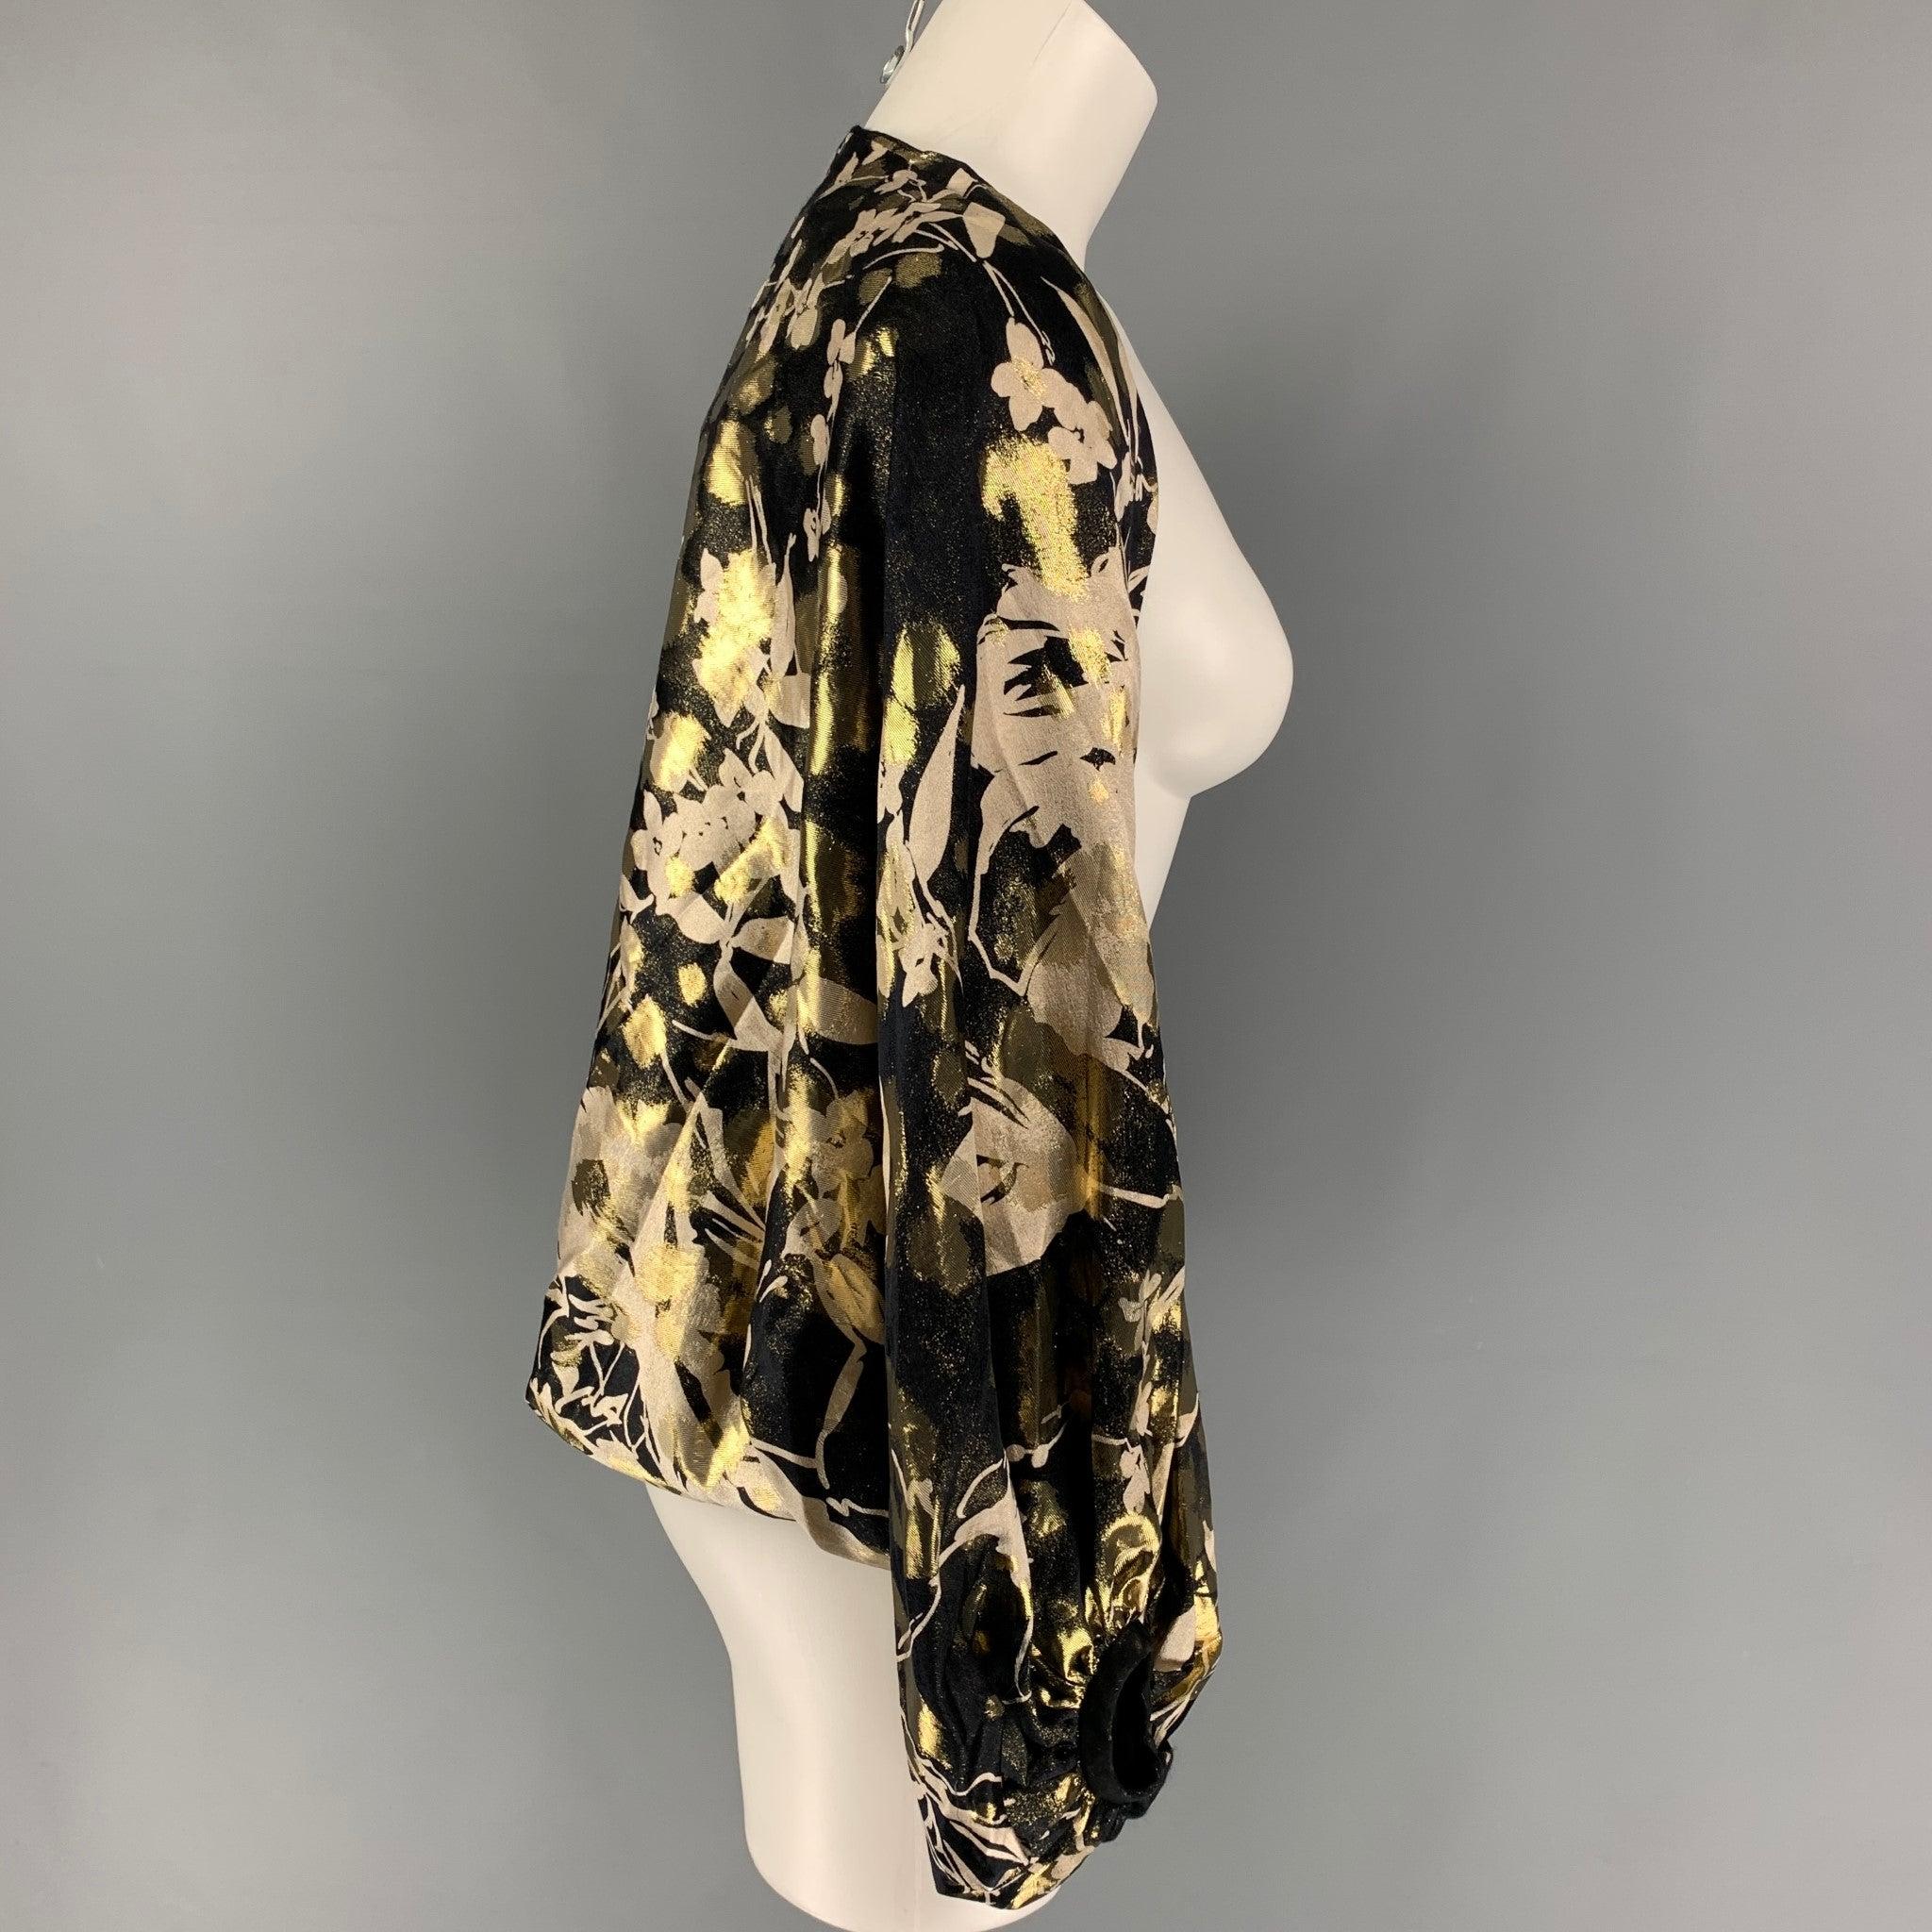 RALPH LAUREN 'Black Label' shrug comes in a gold & black floral silk featuring balloon sleeves.
Very Good
Pre-Owned Condition. 

Marked:   XS/S 

Measurements: 
  Sleeve: 13 inches  Length: 25.5 inches 
  
  
 
Reference: 118965
Category: Casual